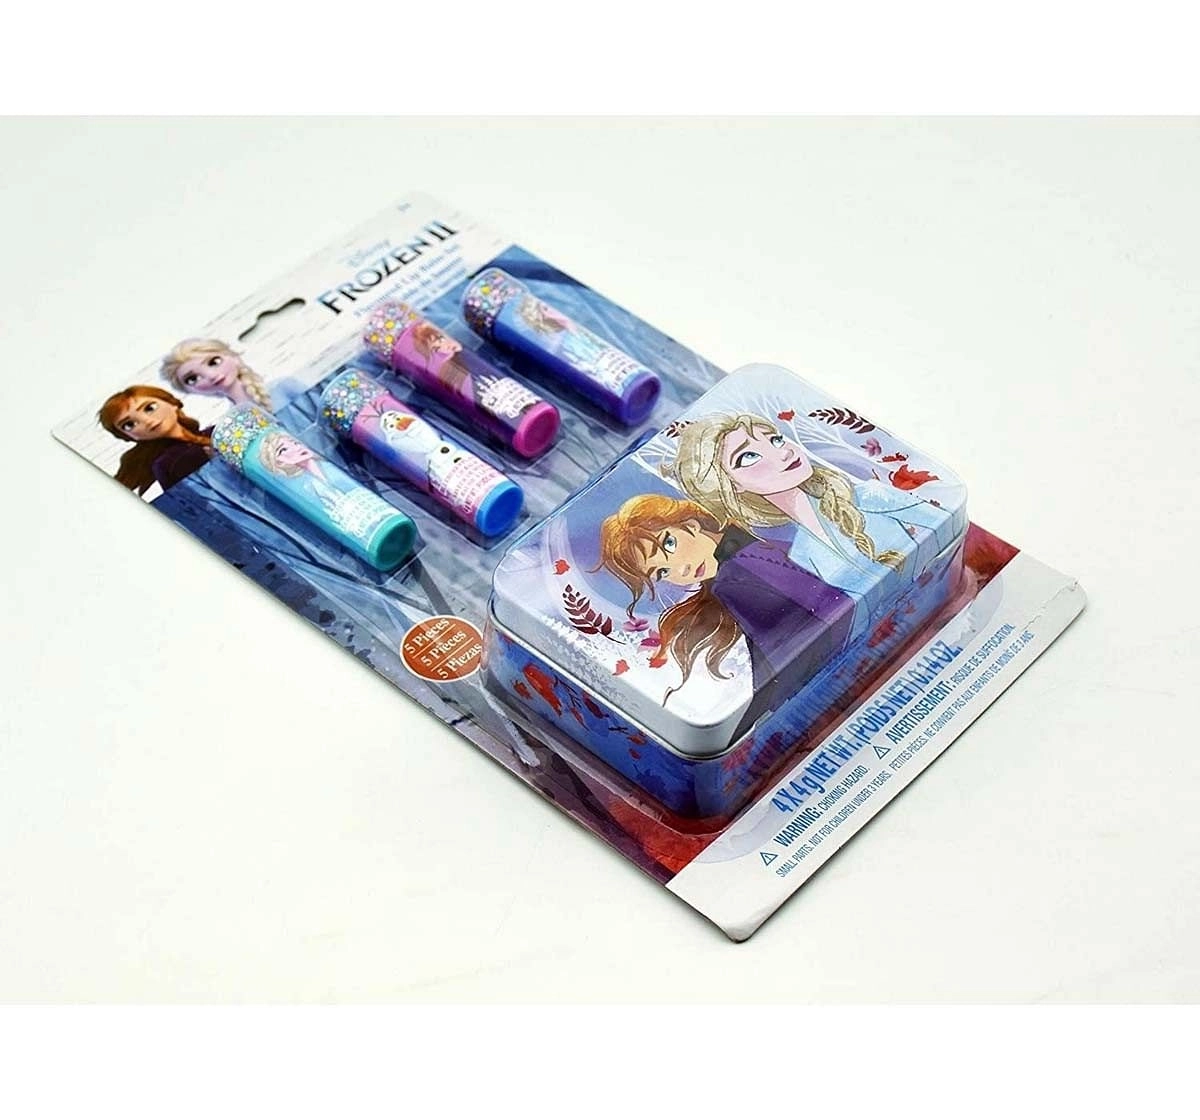 Townley Girl Frozen Ii - 18Pk Nail Polish Toileteries And Makeup for Age 3Y+